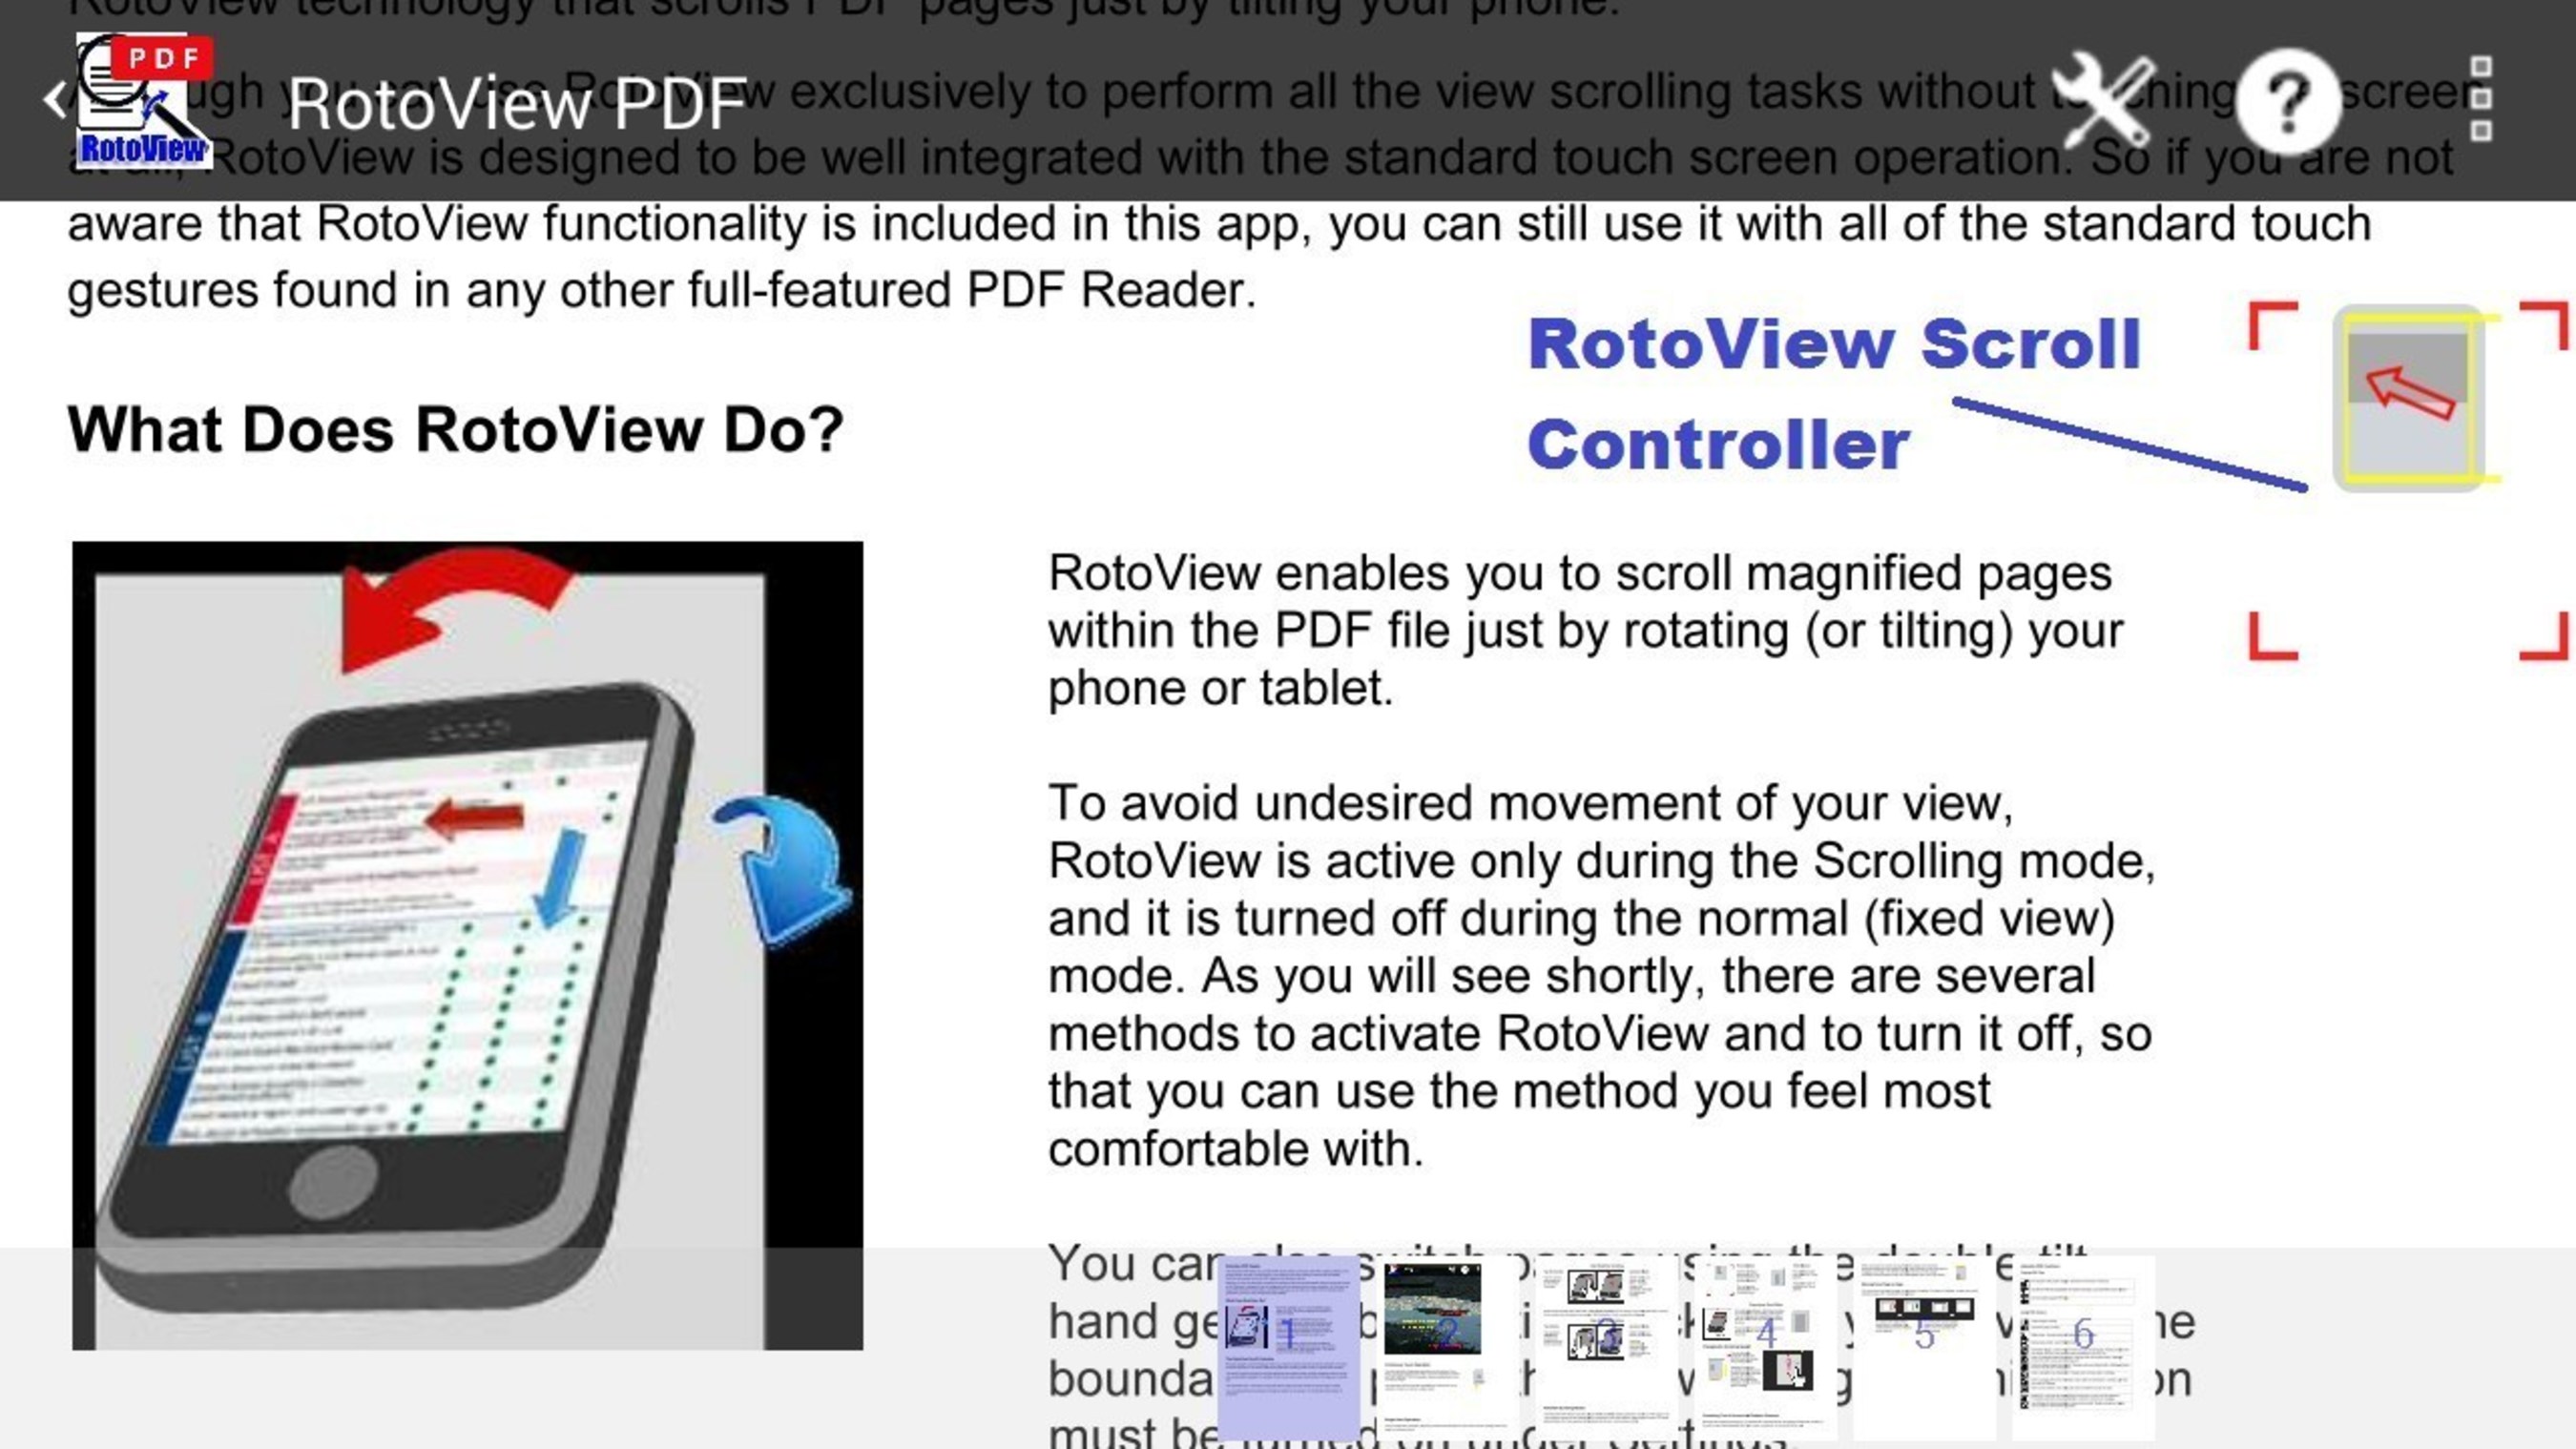 RotoView scroll controller.